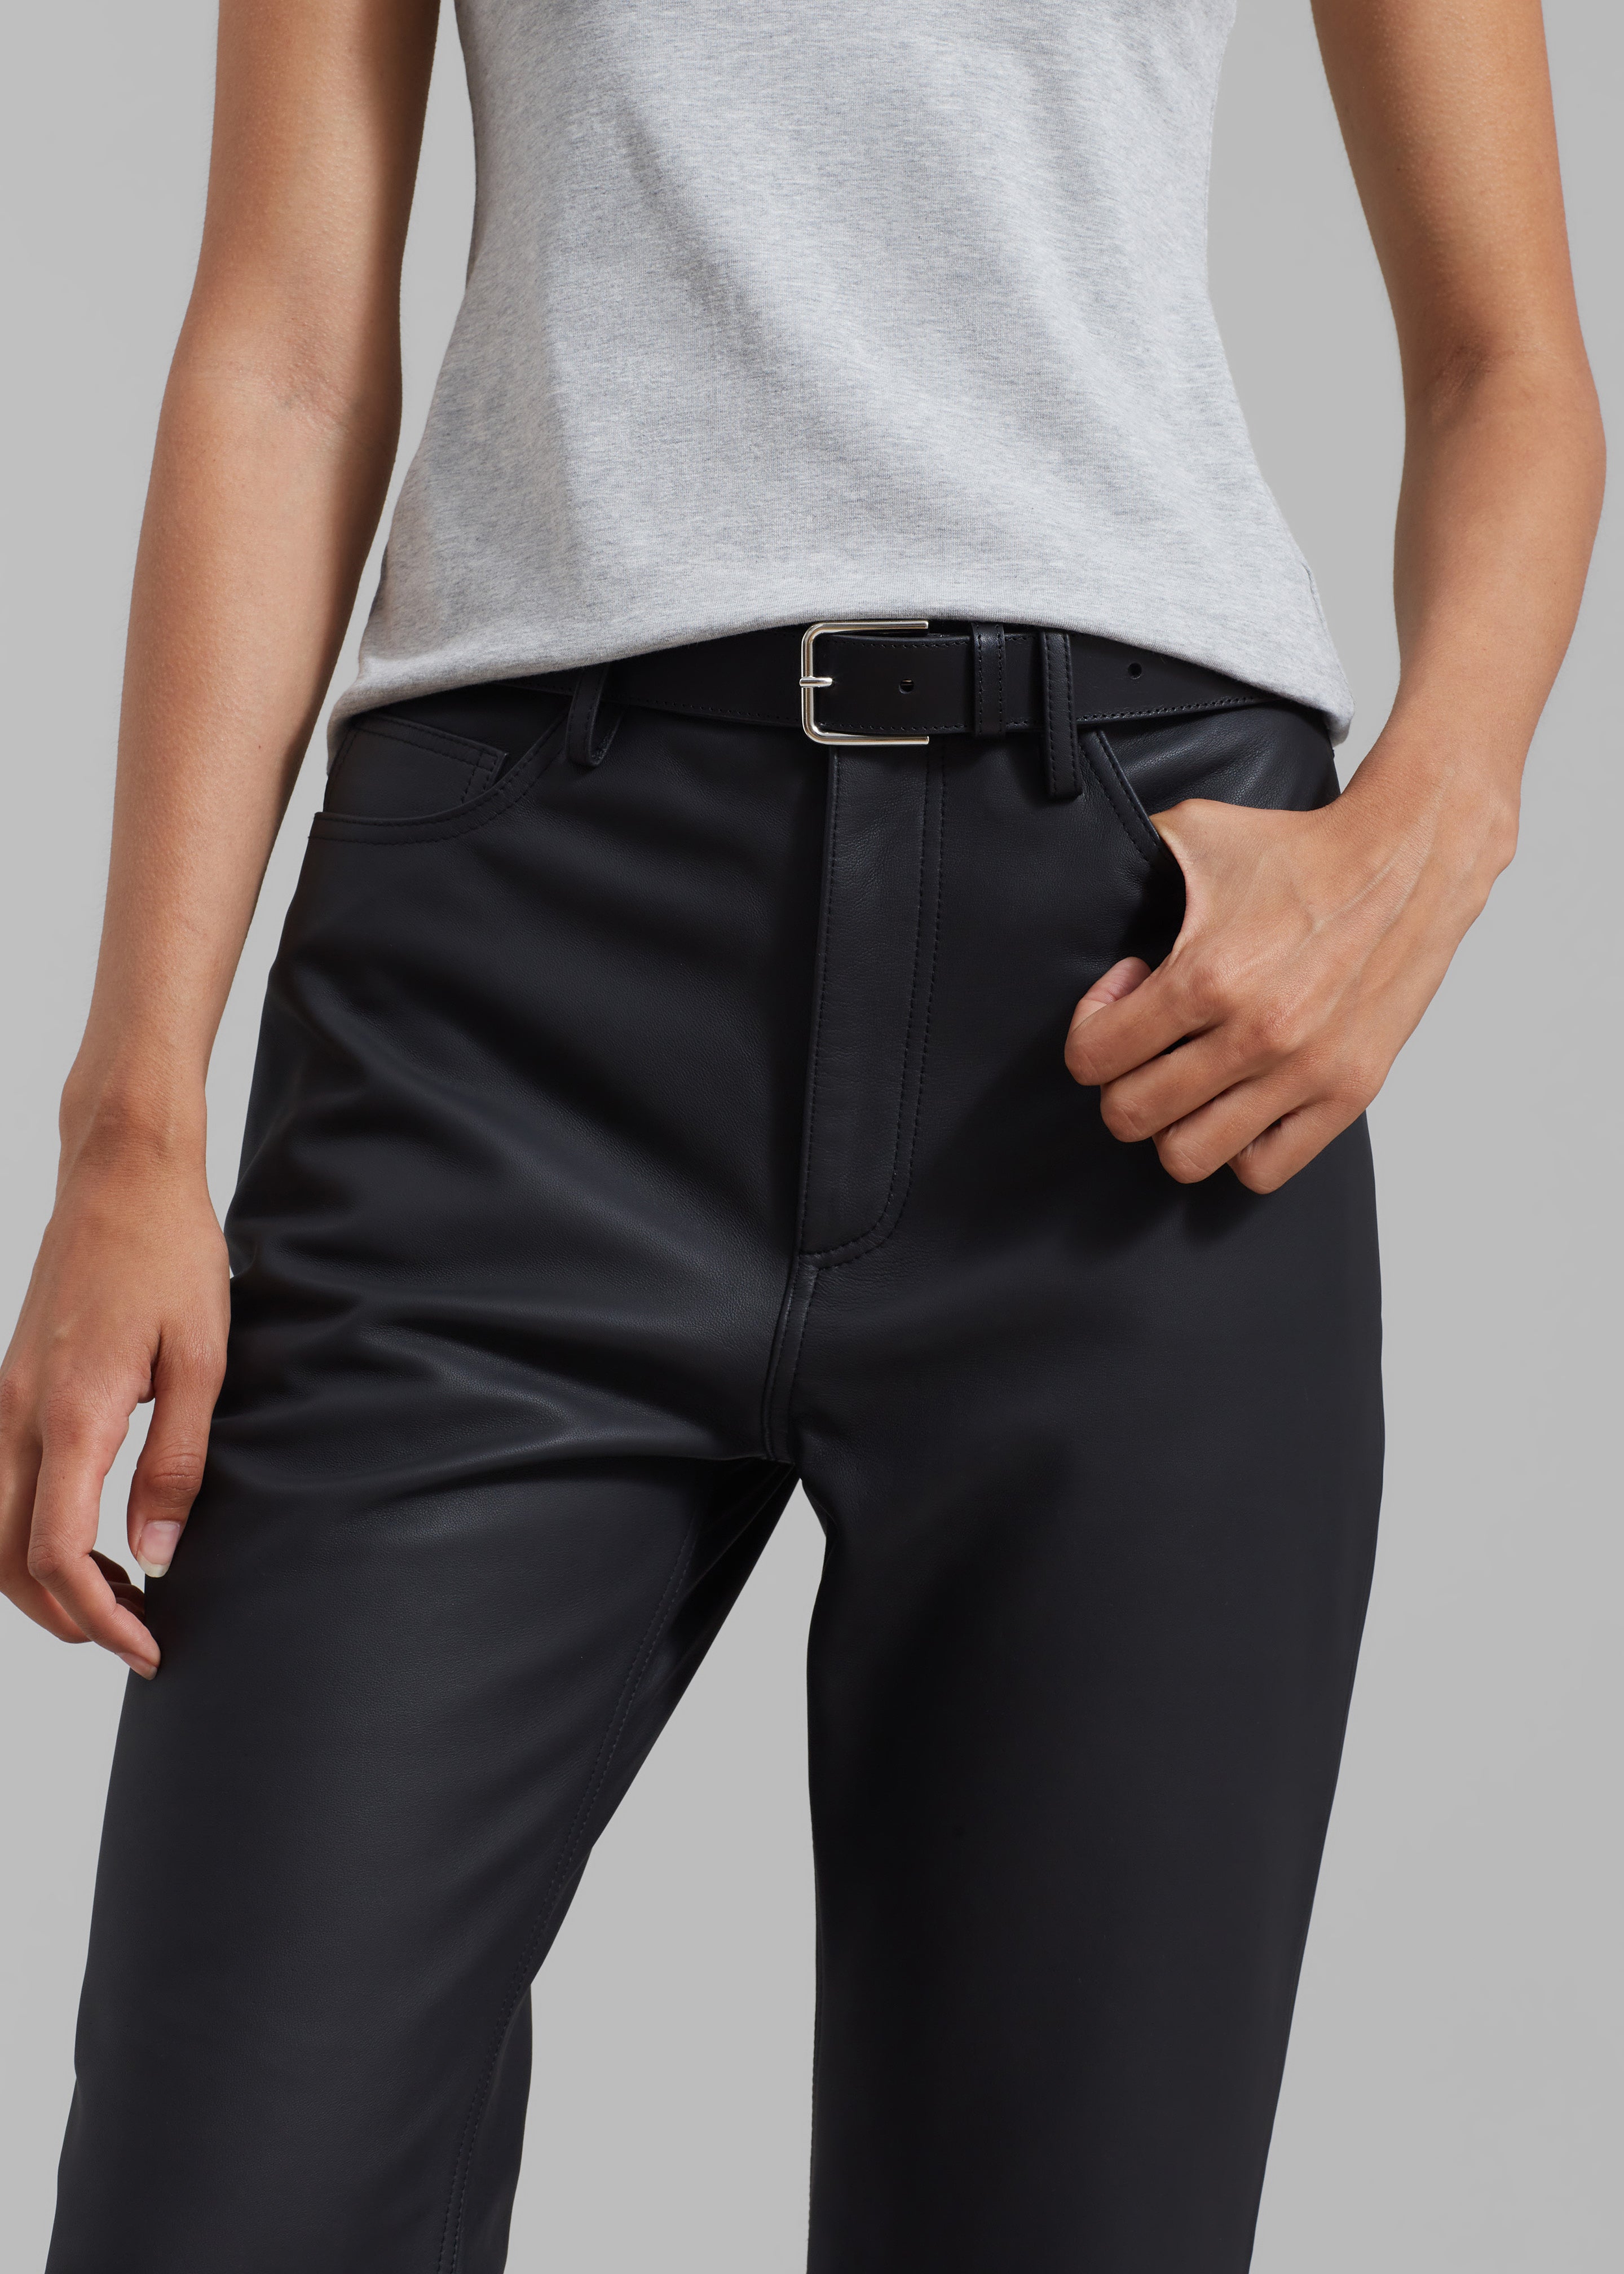 REMAIN Leather Straight Pants - Black - 3